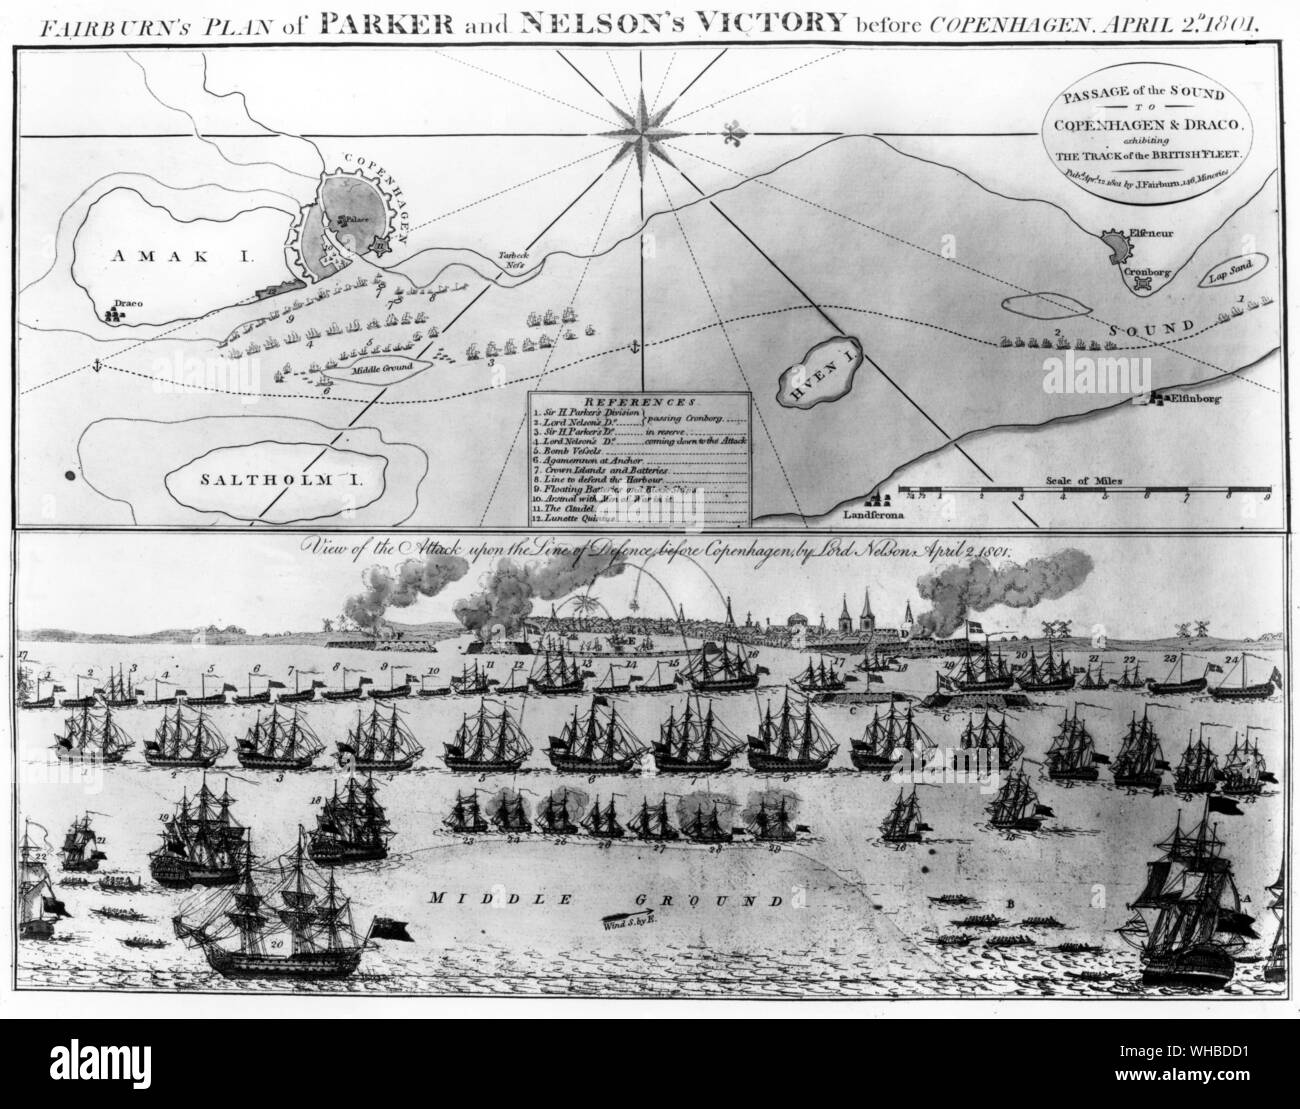 Fairburn's plan of Parker and Nelson's Victory before Copenhagen April 2nd 1801.. View of the Attack upon the Line of Defence before Copenhagen by Lord Nelson . Stock Photo